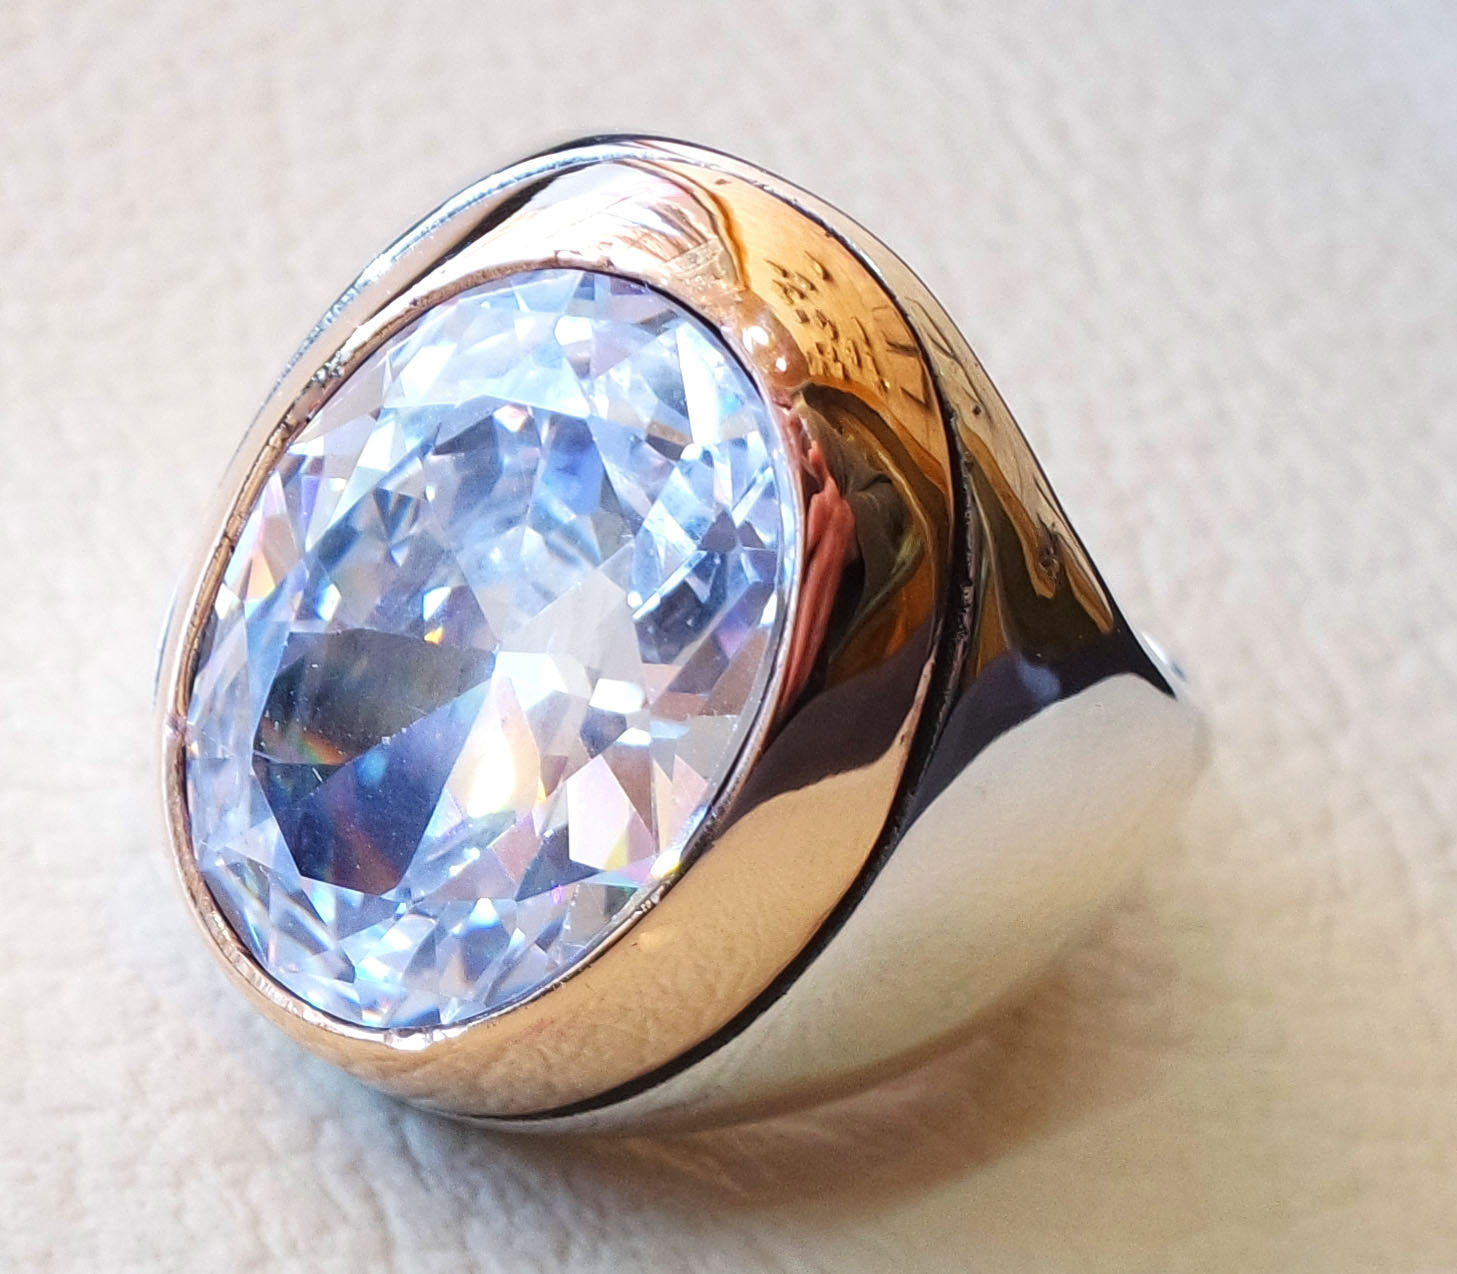 diamond synthetic stone high quality white color cubic zircon huge men ring sterling silver 925 any size bronze frame heavy jewelry